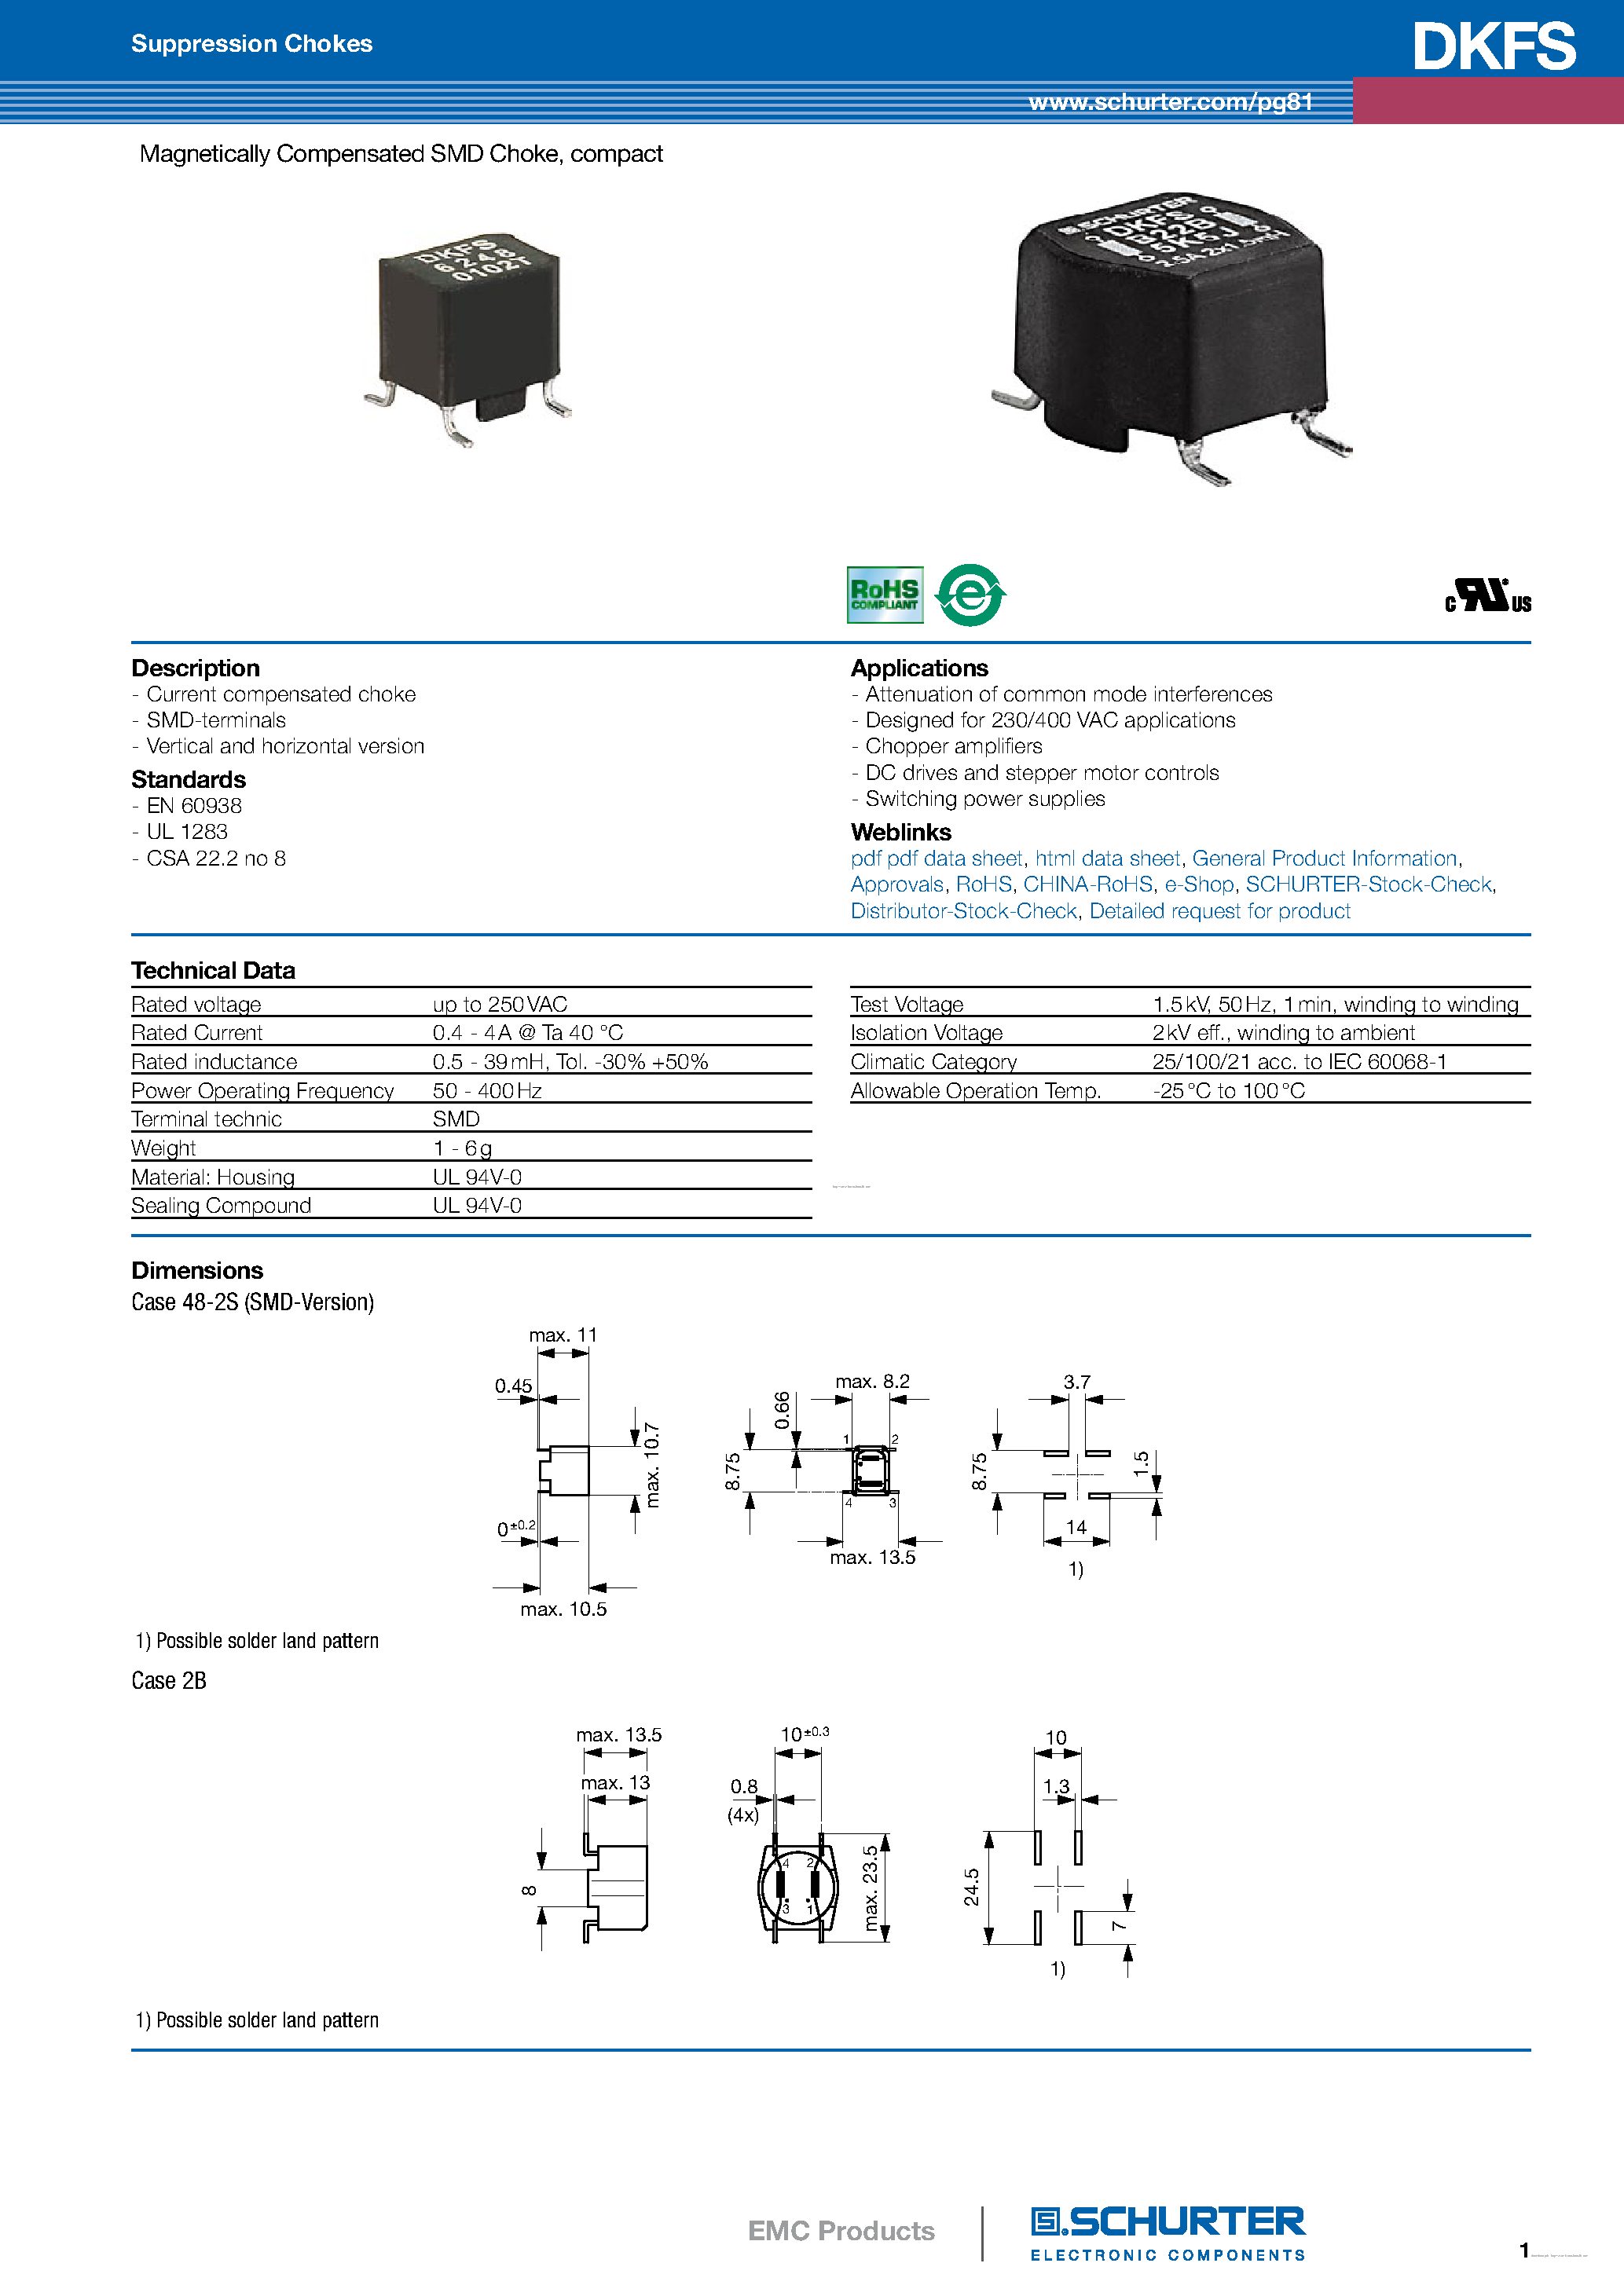 Datasheet DKFS-6248-02D5 - Magnetically Compensated SMD Choke page 1